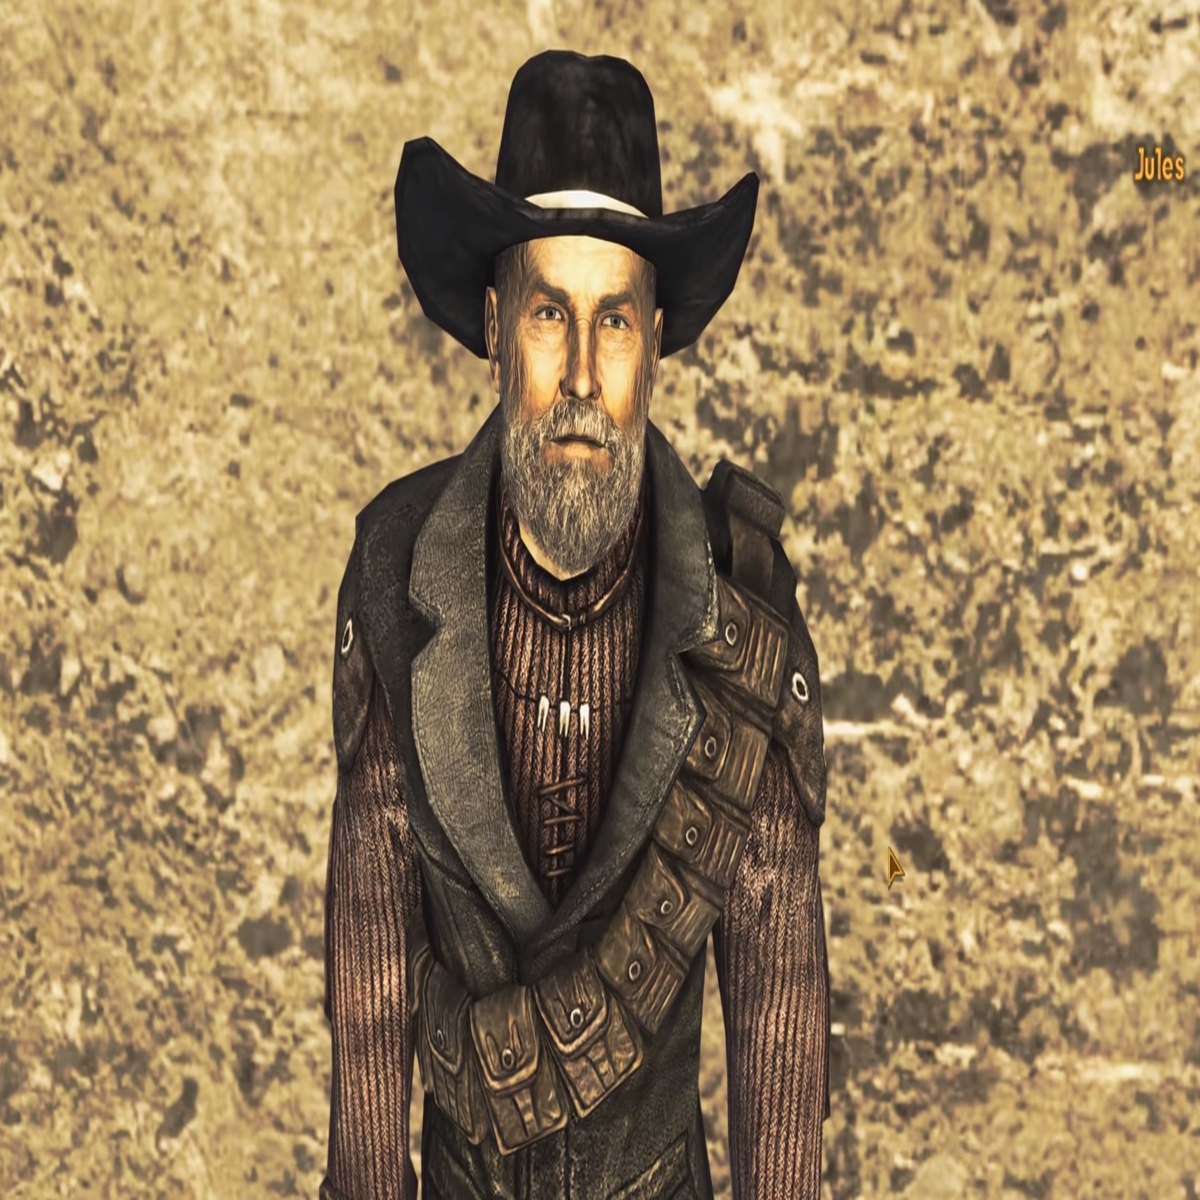 This Fallout: New Vegas mod replaces 145 voices